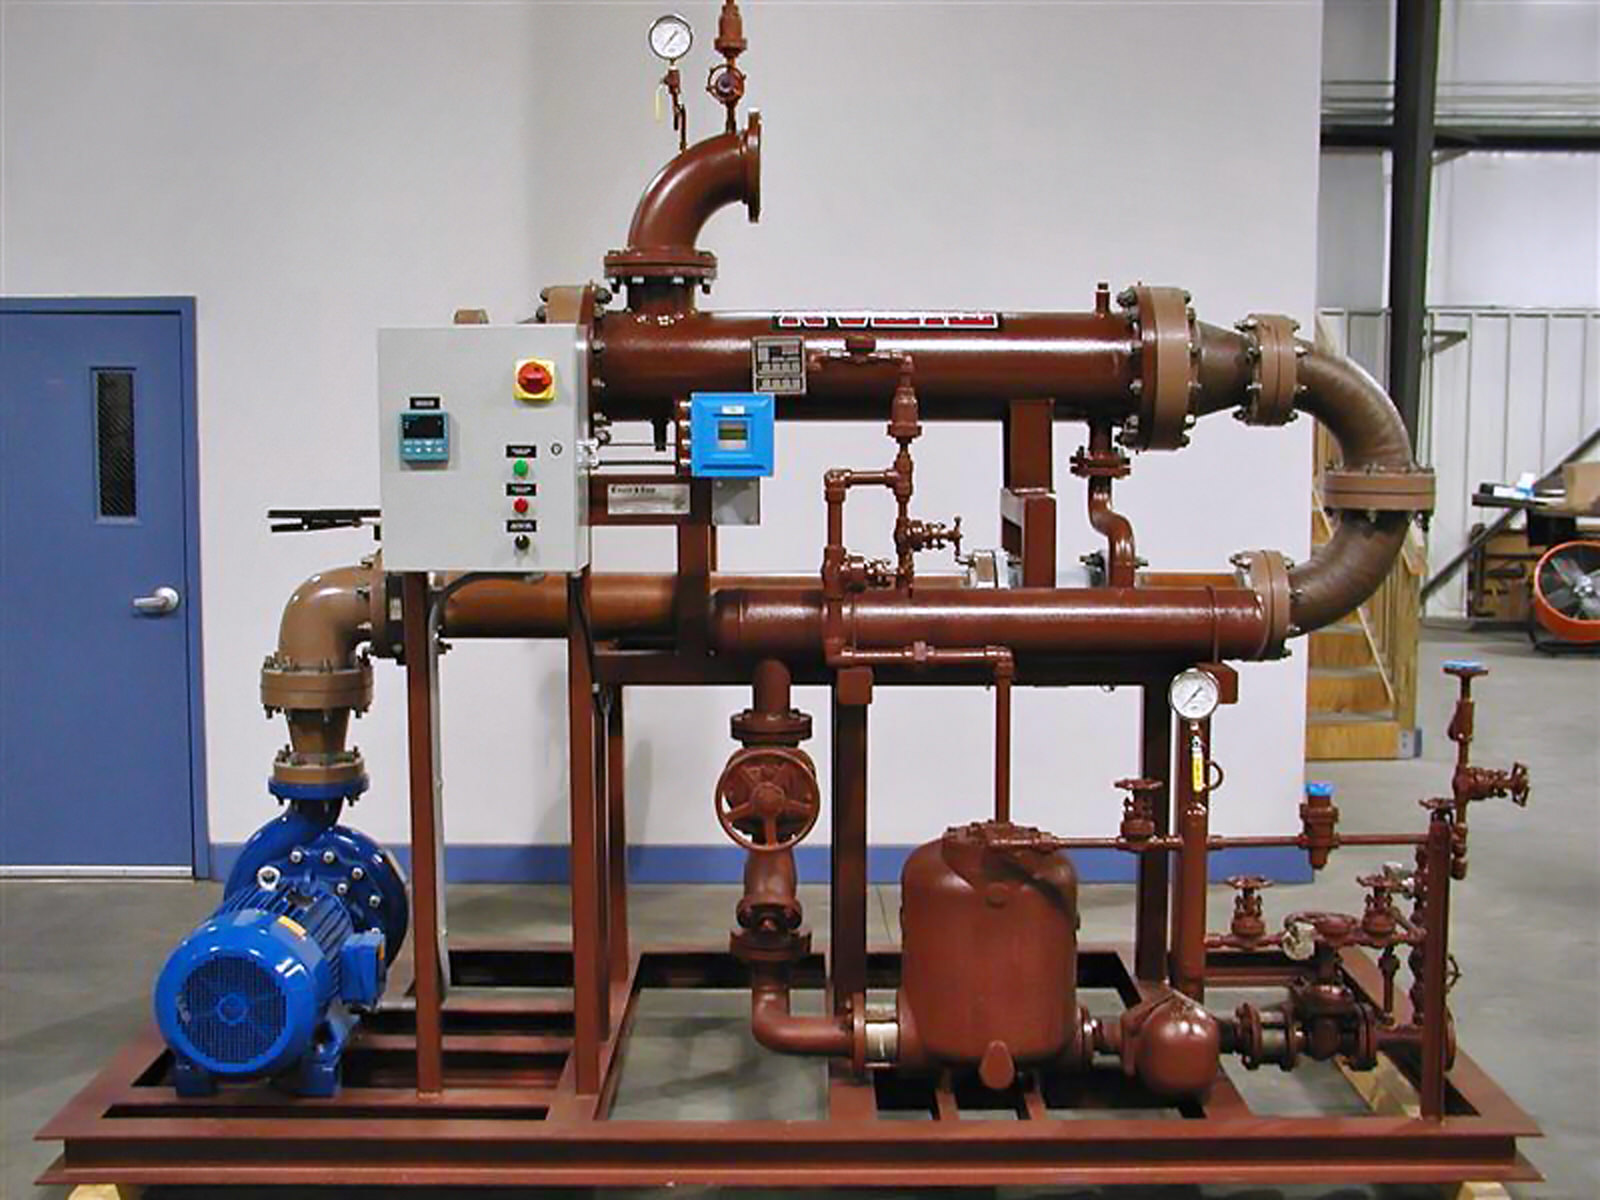 Tantalum Heat Exchanger Skid Mounted System with Pump and Steam